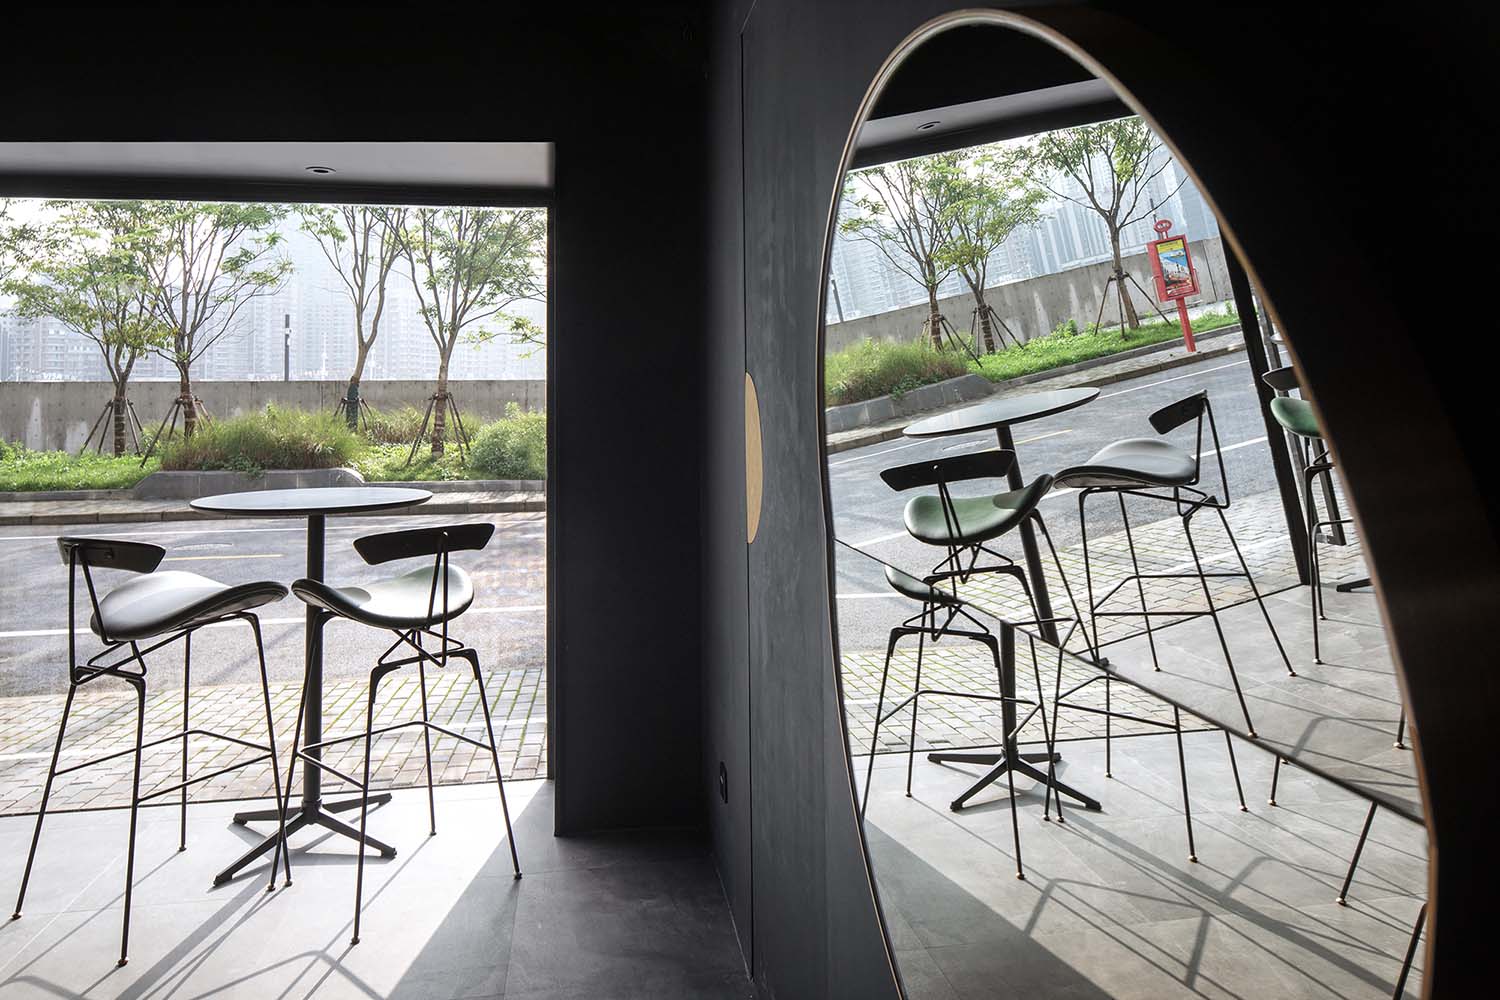 Mooncraft Shanghai Craft Beer and Whiskey Bar Designed by o&o studio